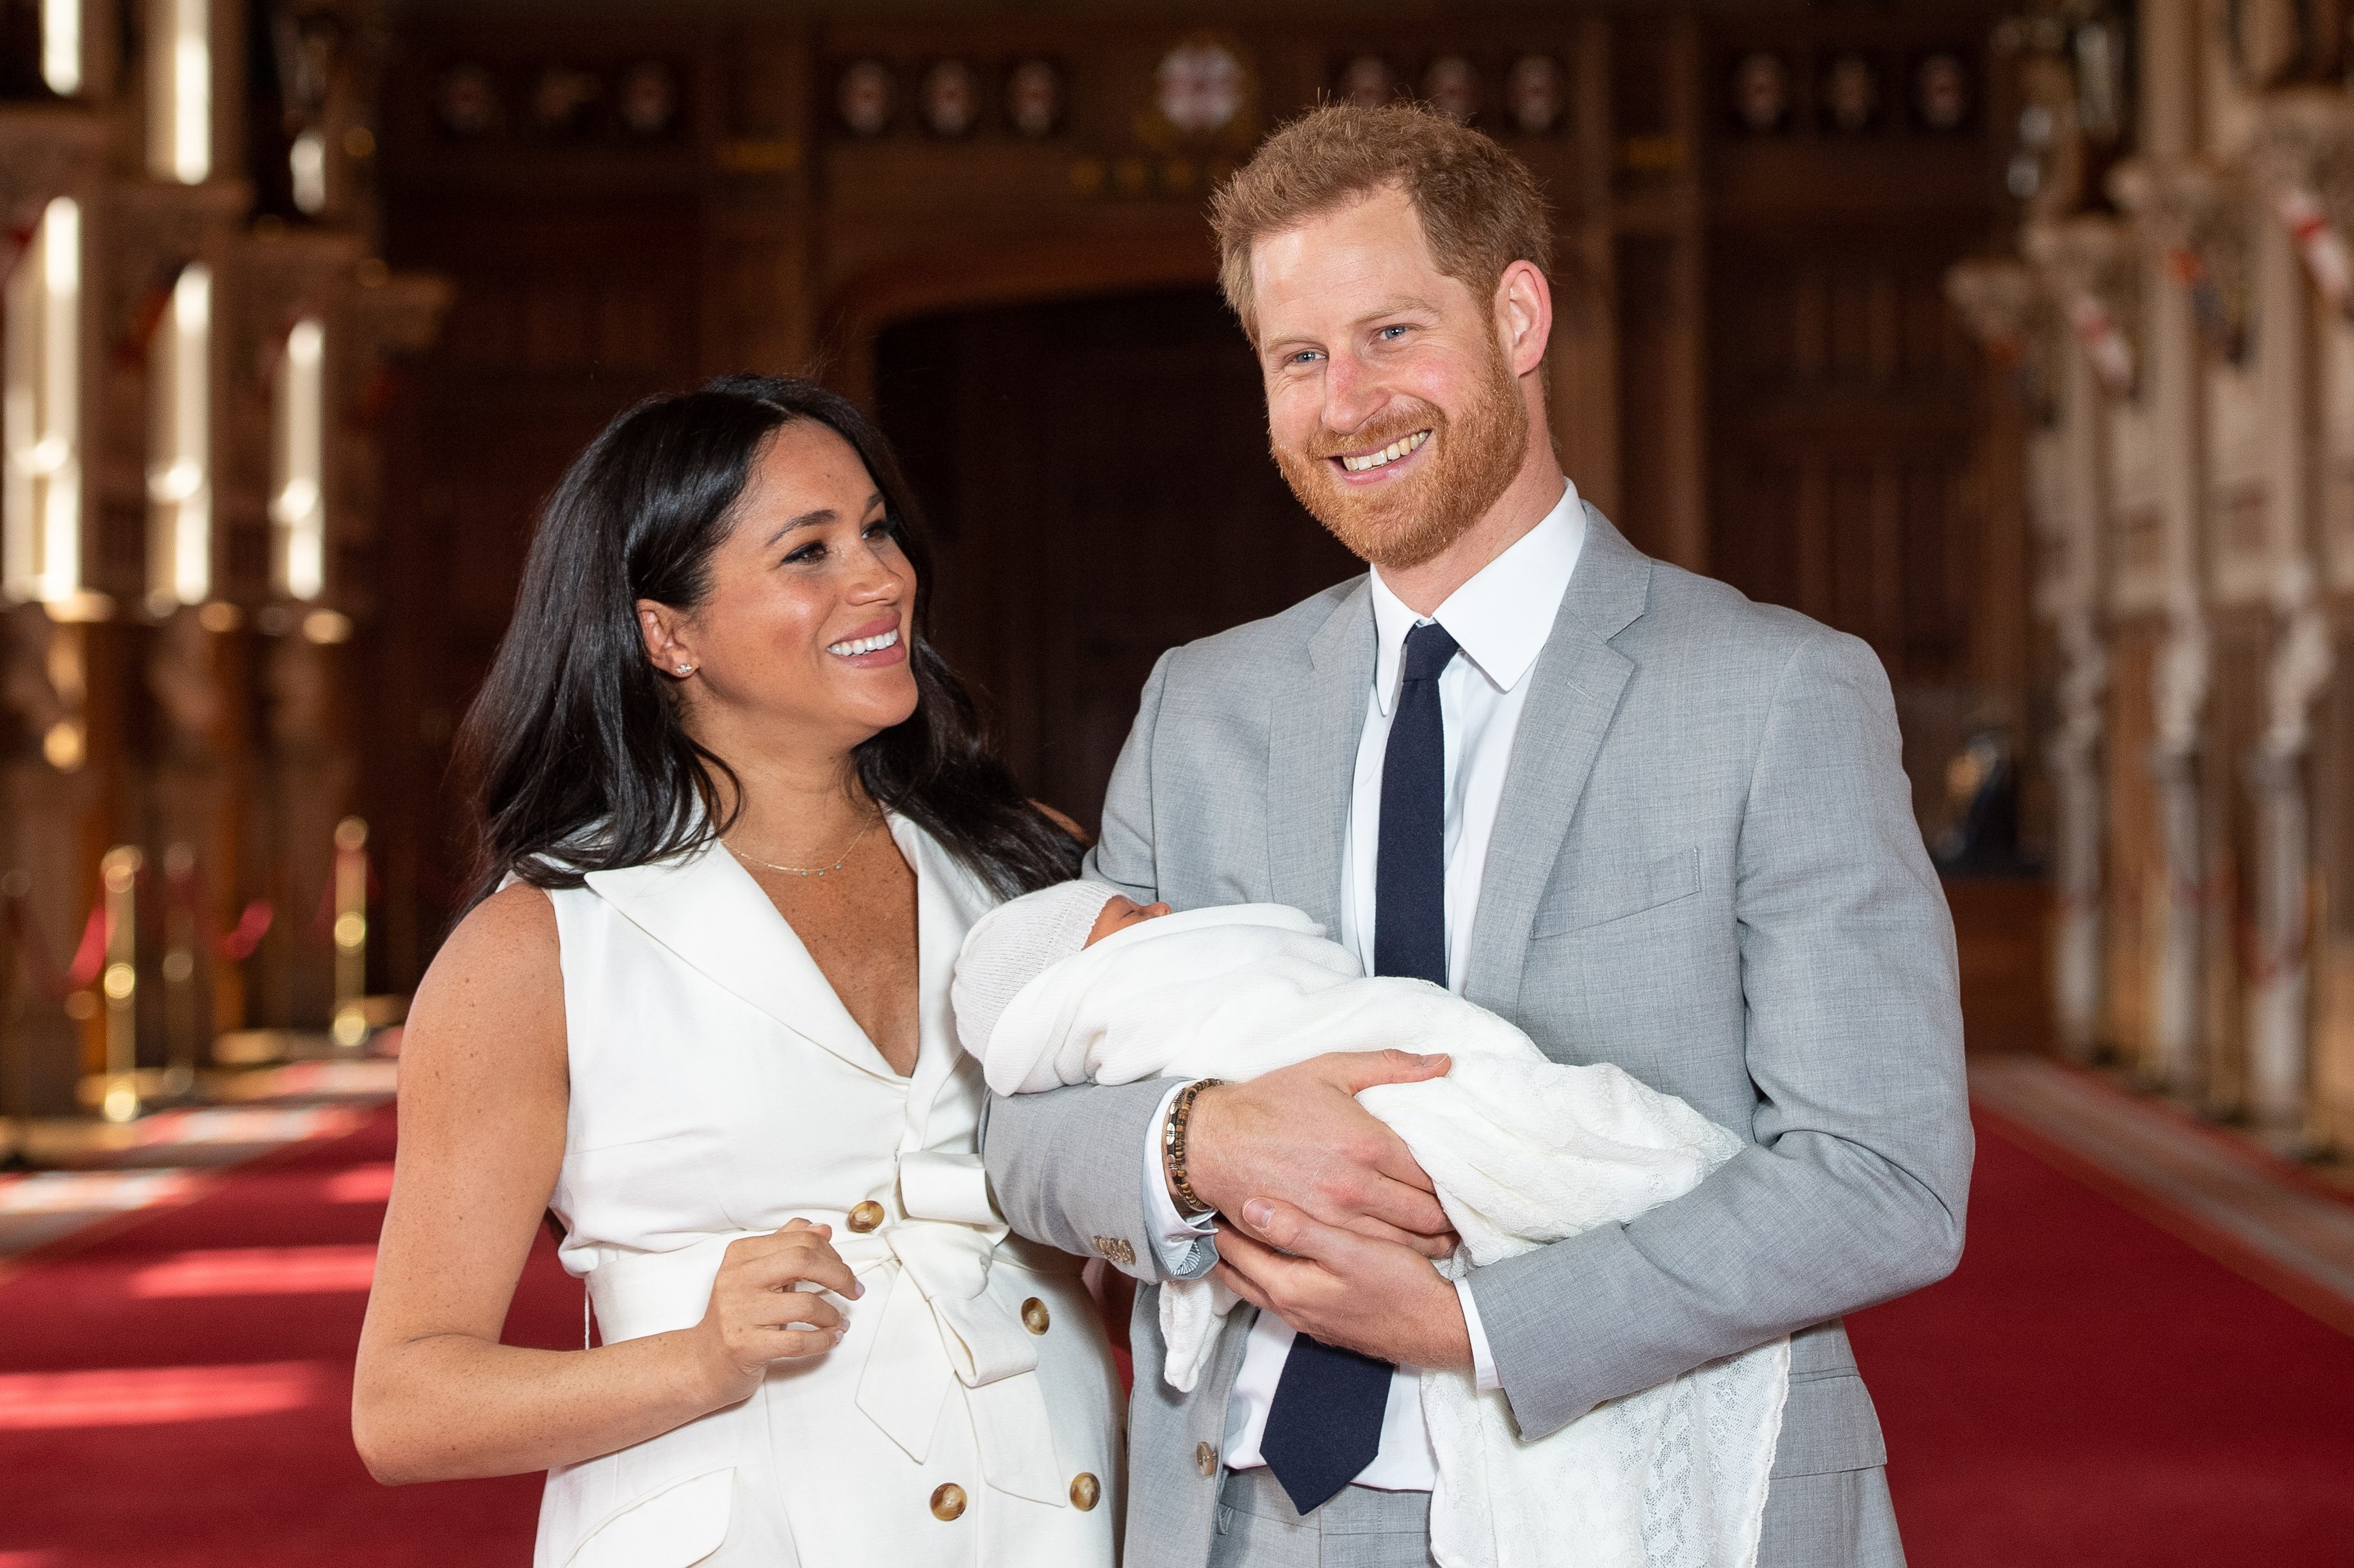 Prince Harry and Meghan Markle pose with newborn Archie Harrison Mountbatten-Windsor at Windsor Castle in England on May 8, 2019 | Photo: Getty Images